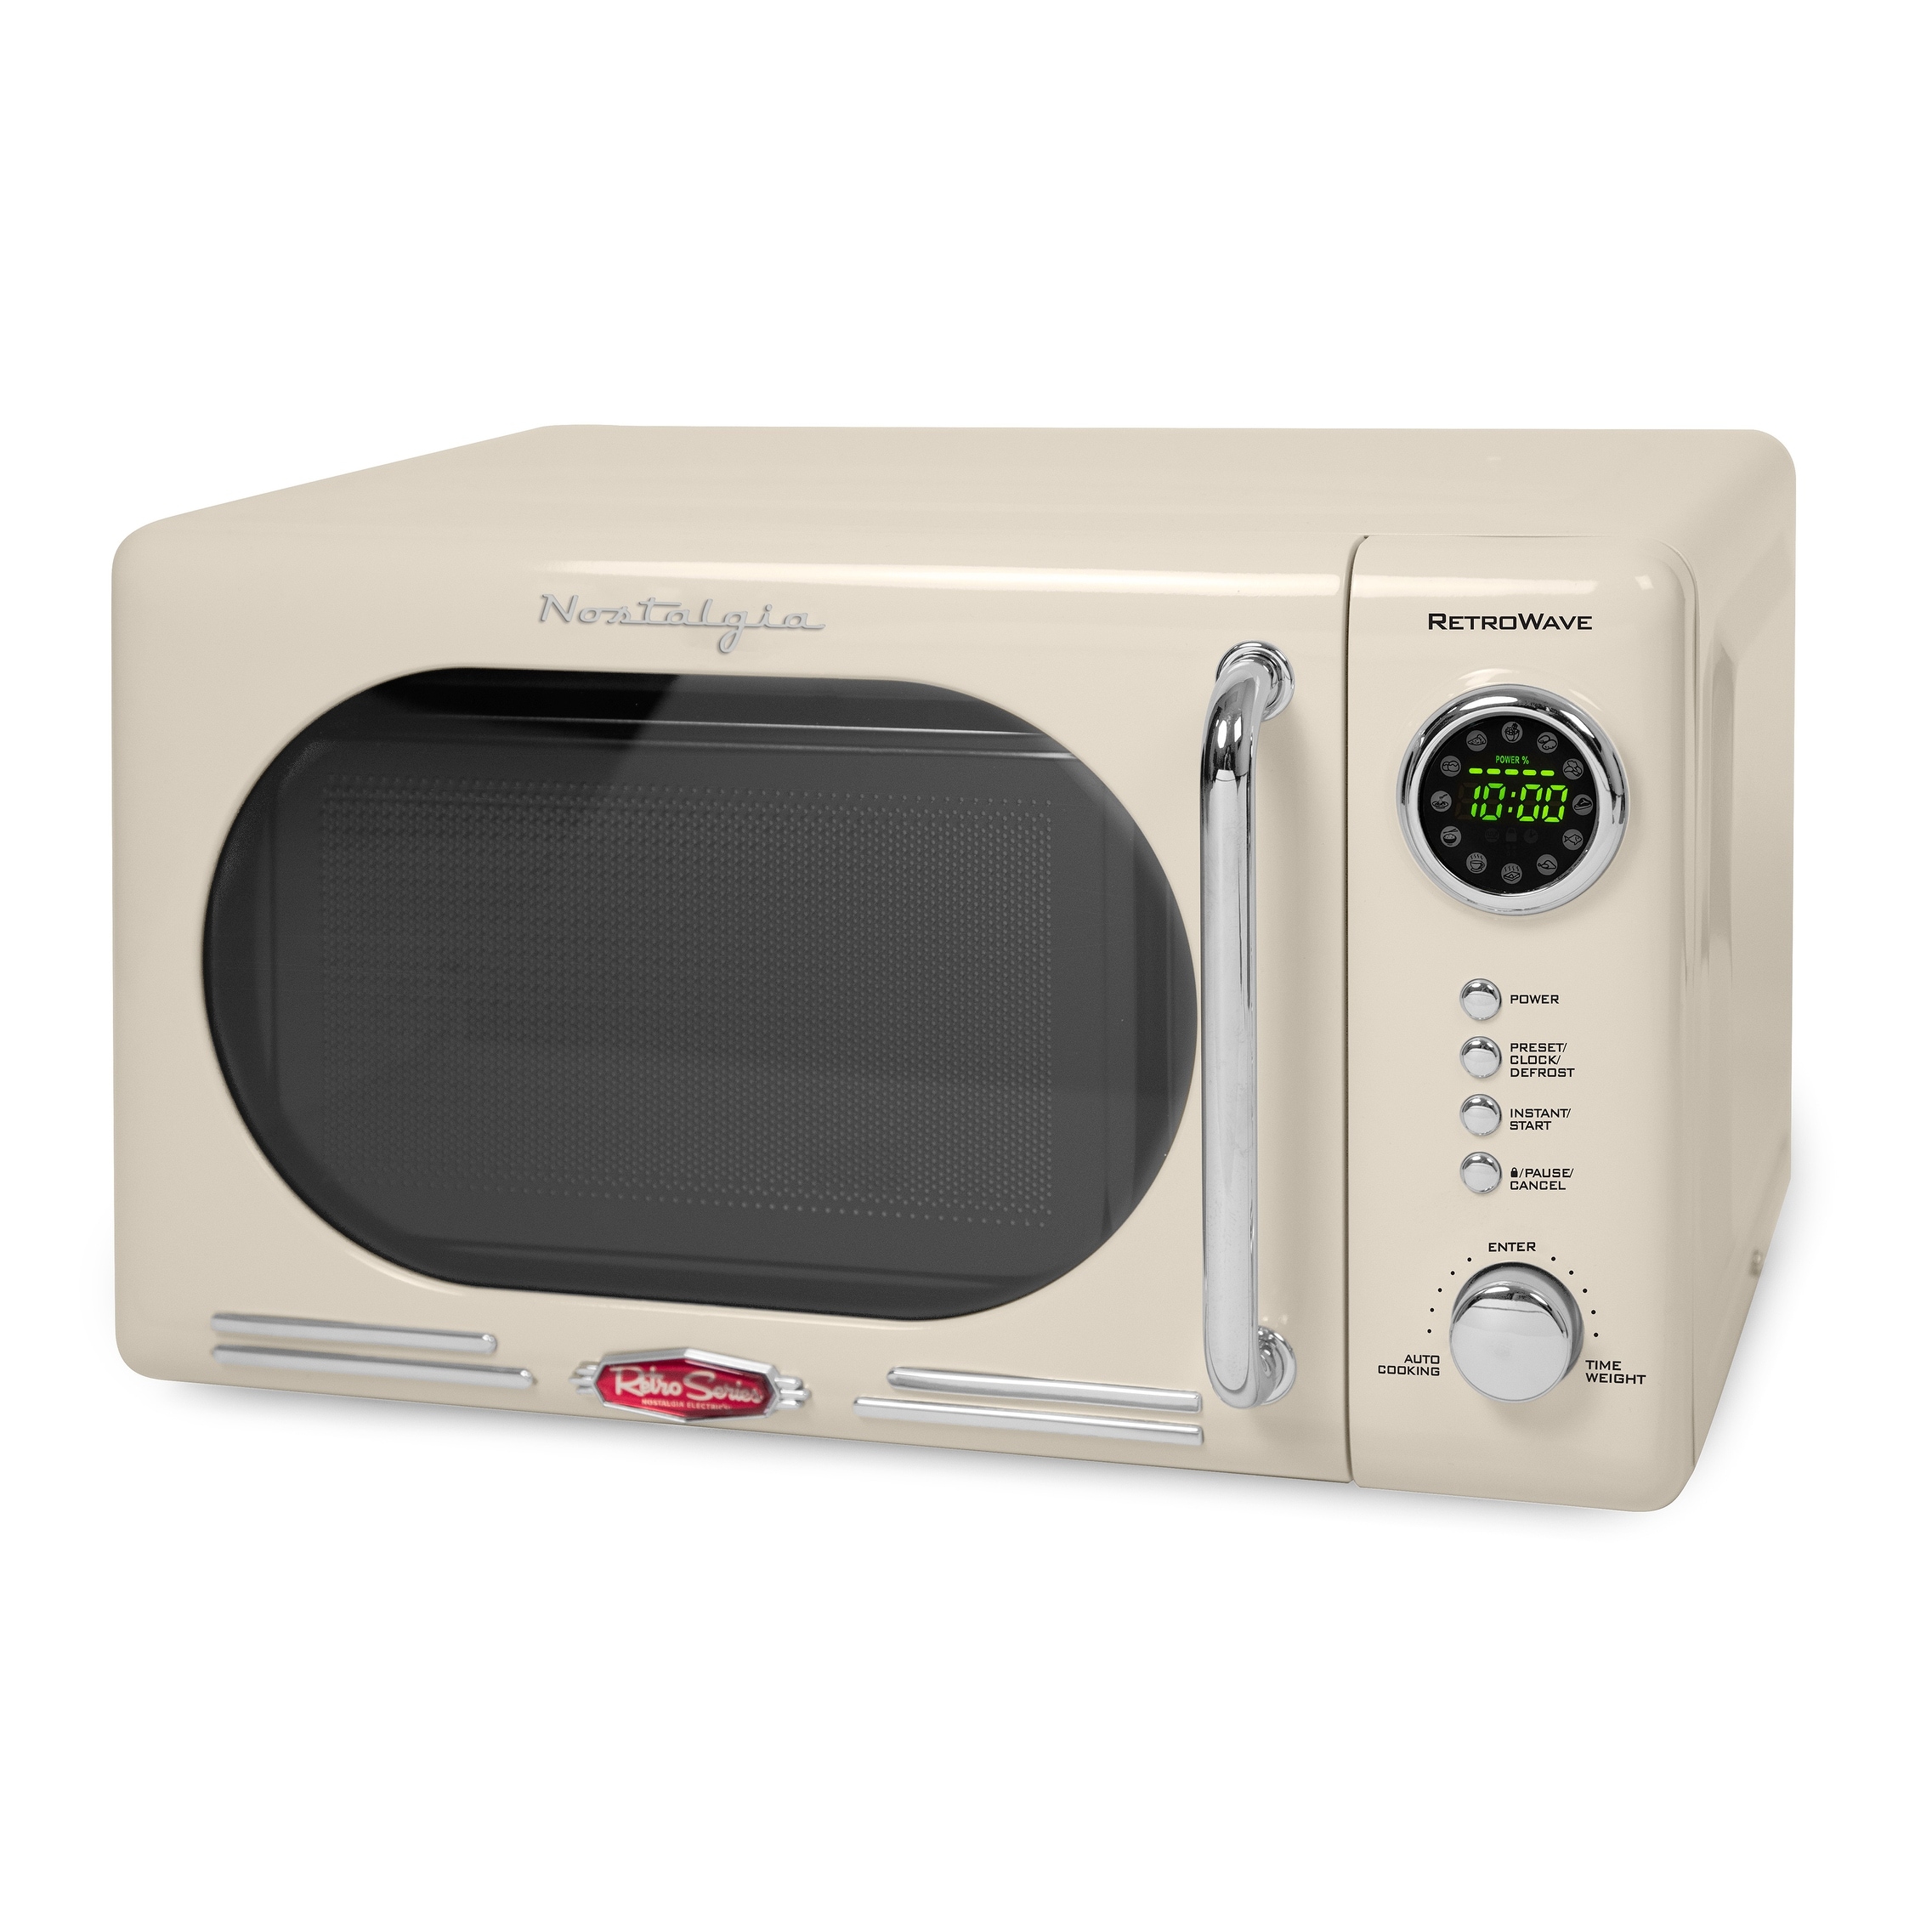 Avanti 18 in. 0.7 cu.ft Countertop Microwave with 10 Power Levels - White